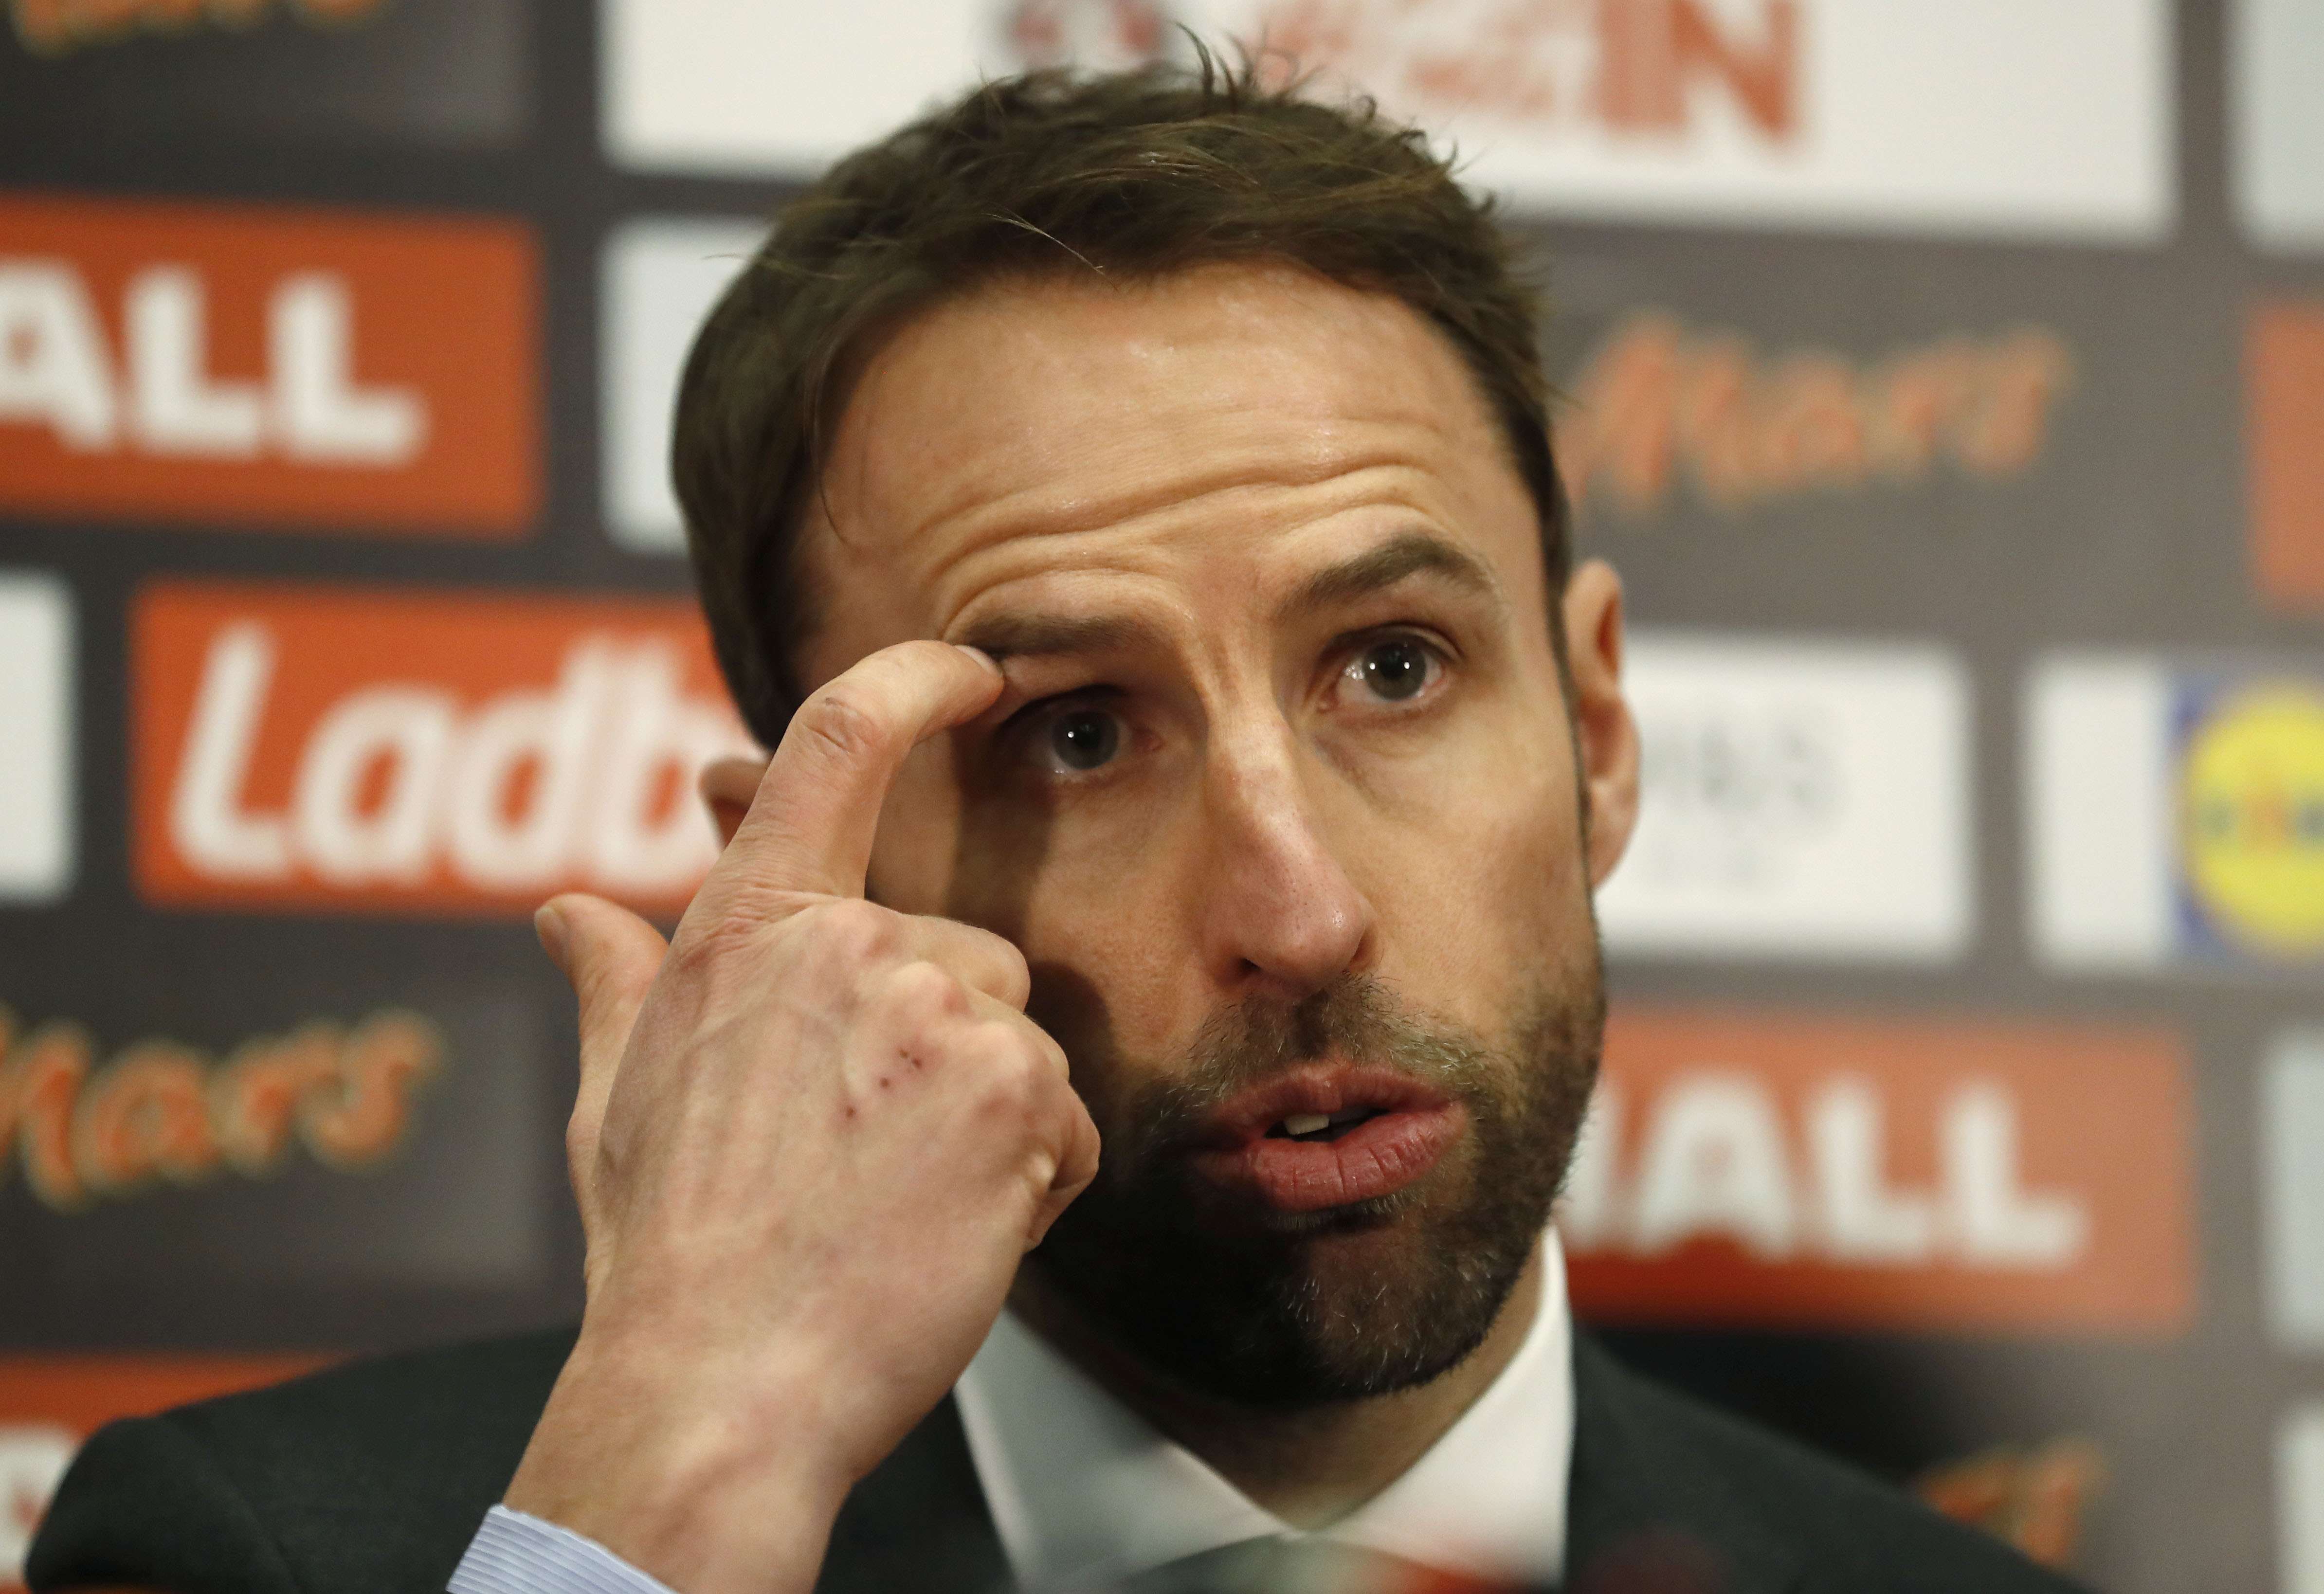 Gareth Southgate facing the media at Wembley on Thursday after his appointment as England manager on Wednesday. Photo: Reuters